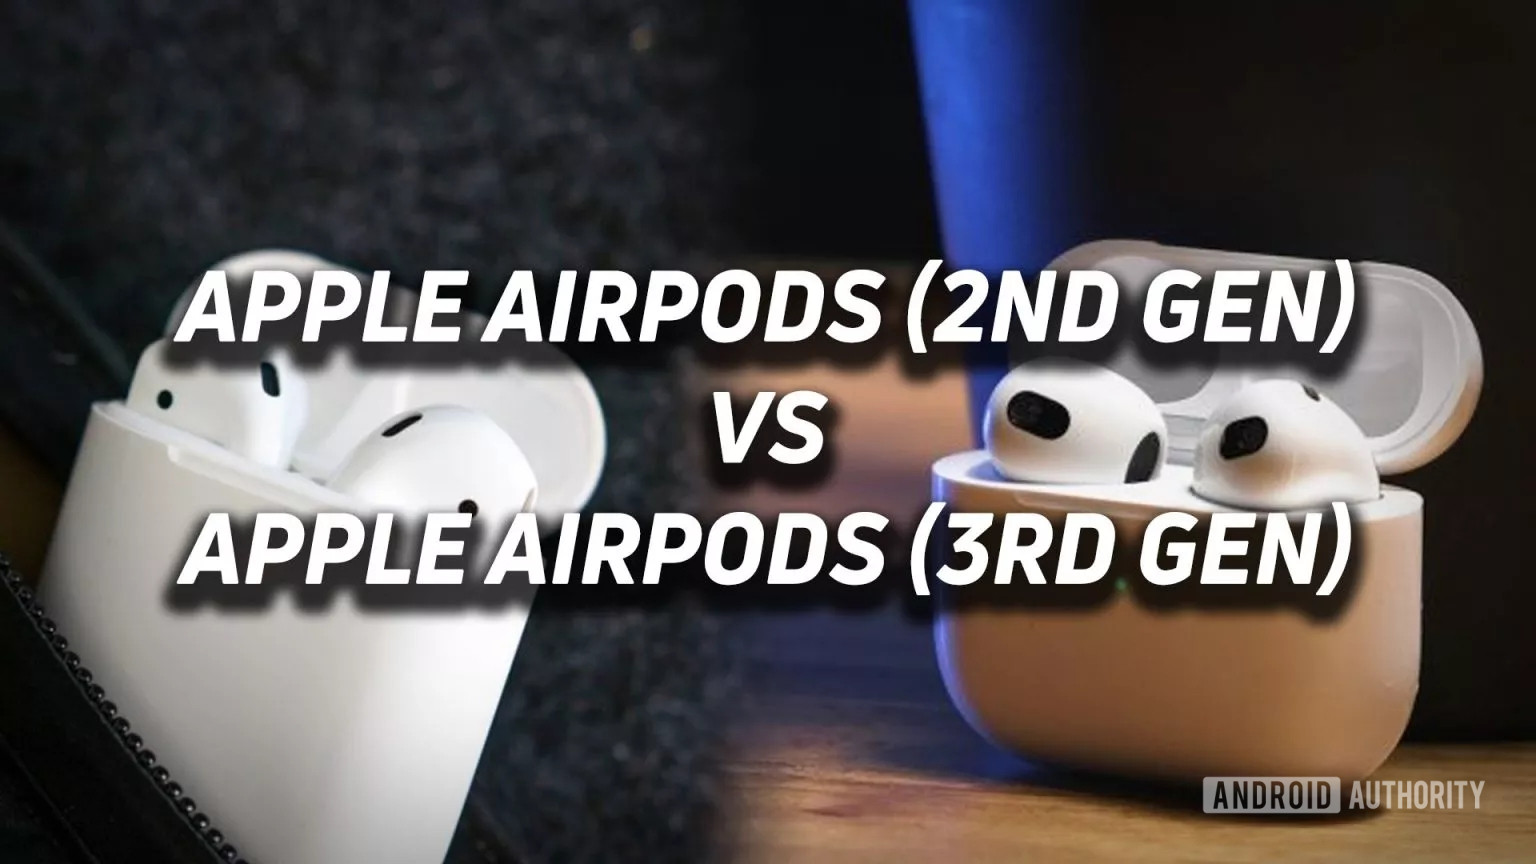 A blended image of the Apple AirPods (2nd generation) and Apple AirPods (3rd generation) with versus text overlaid.